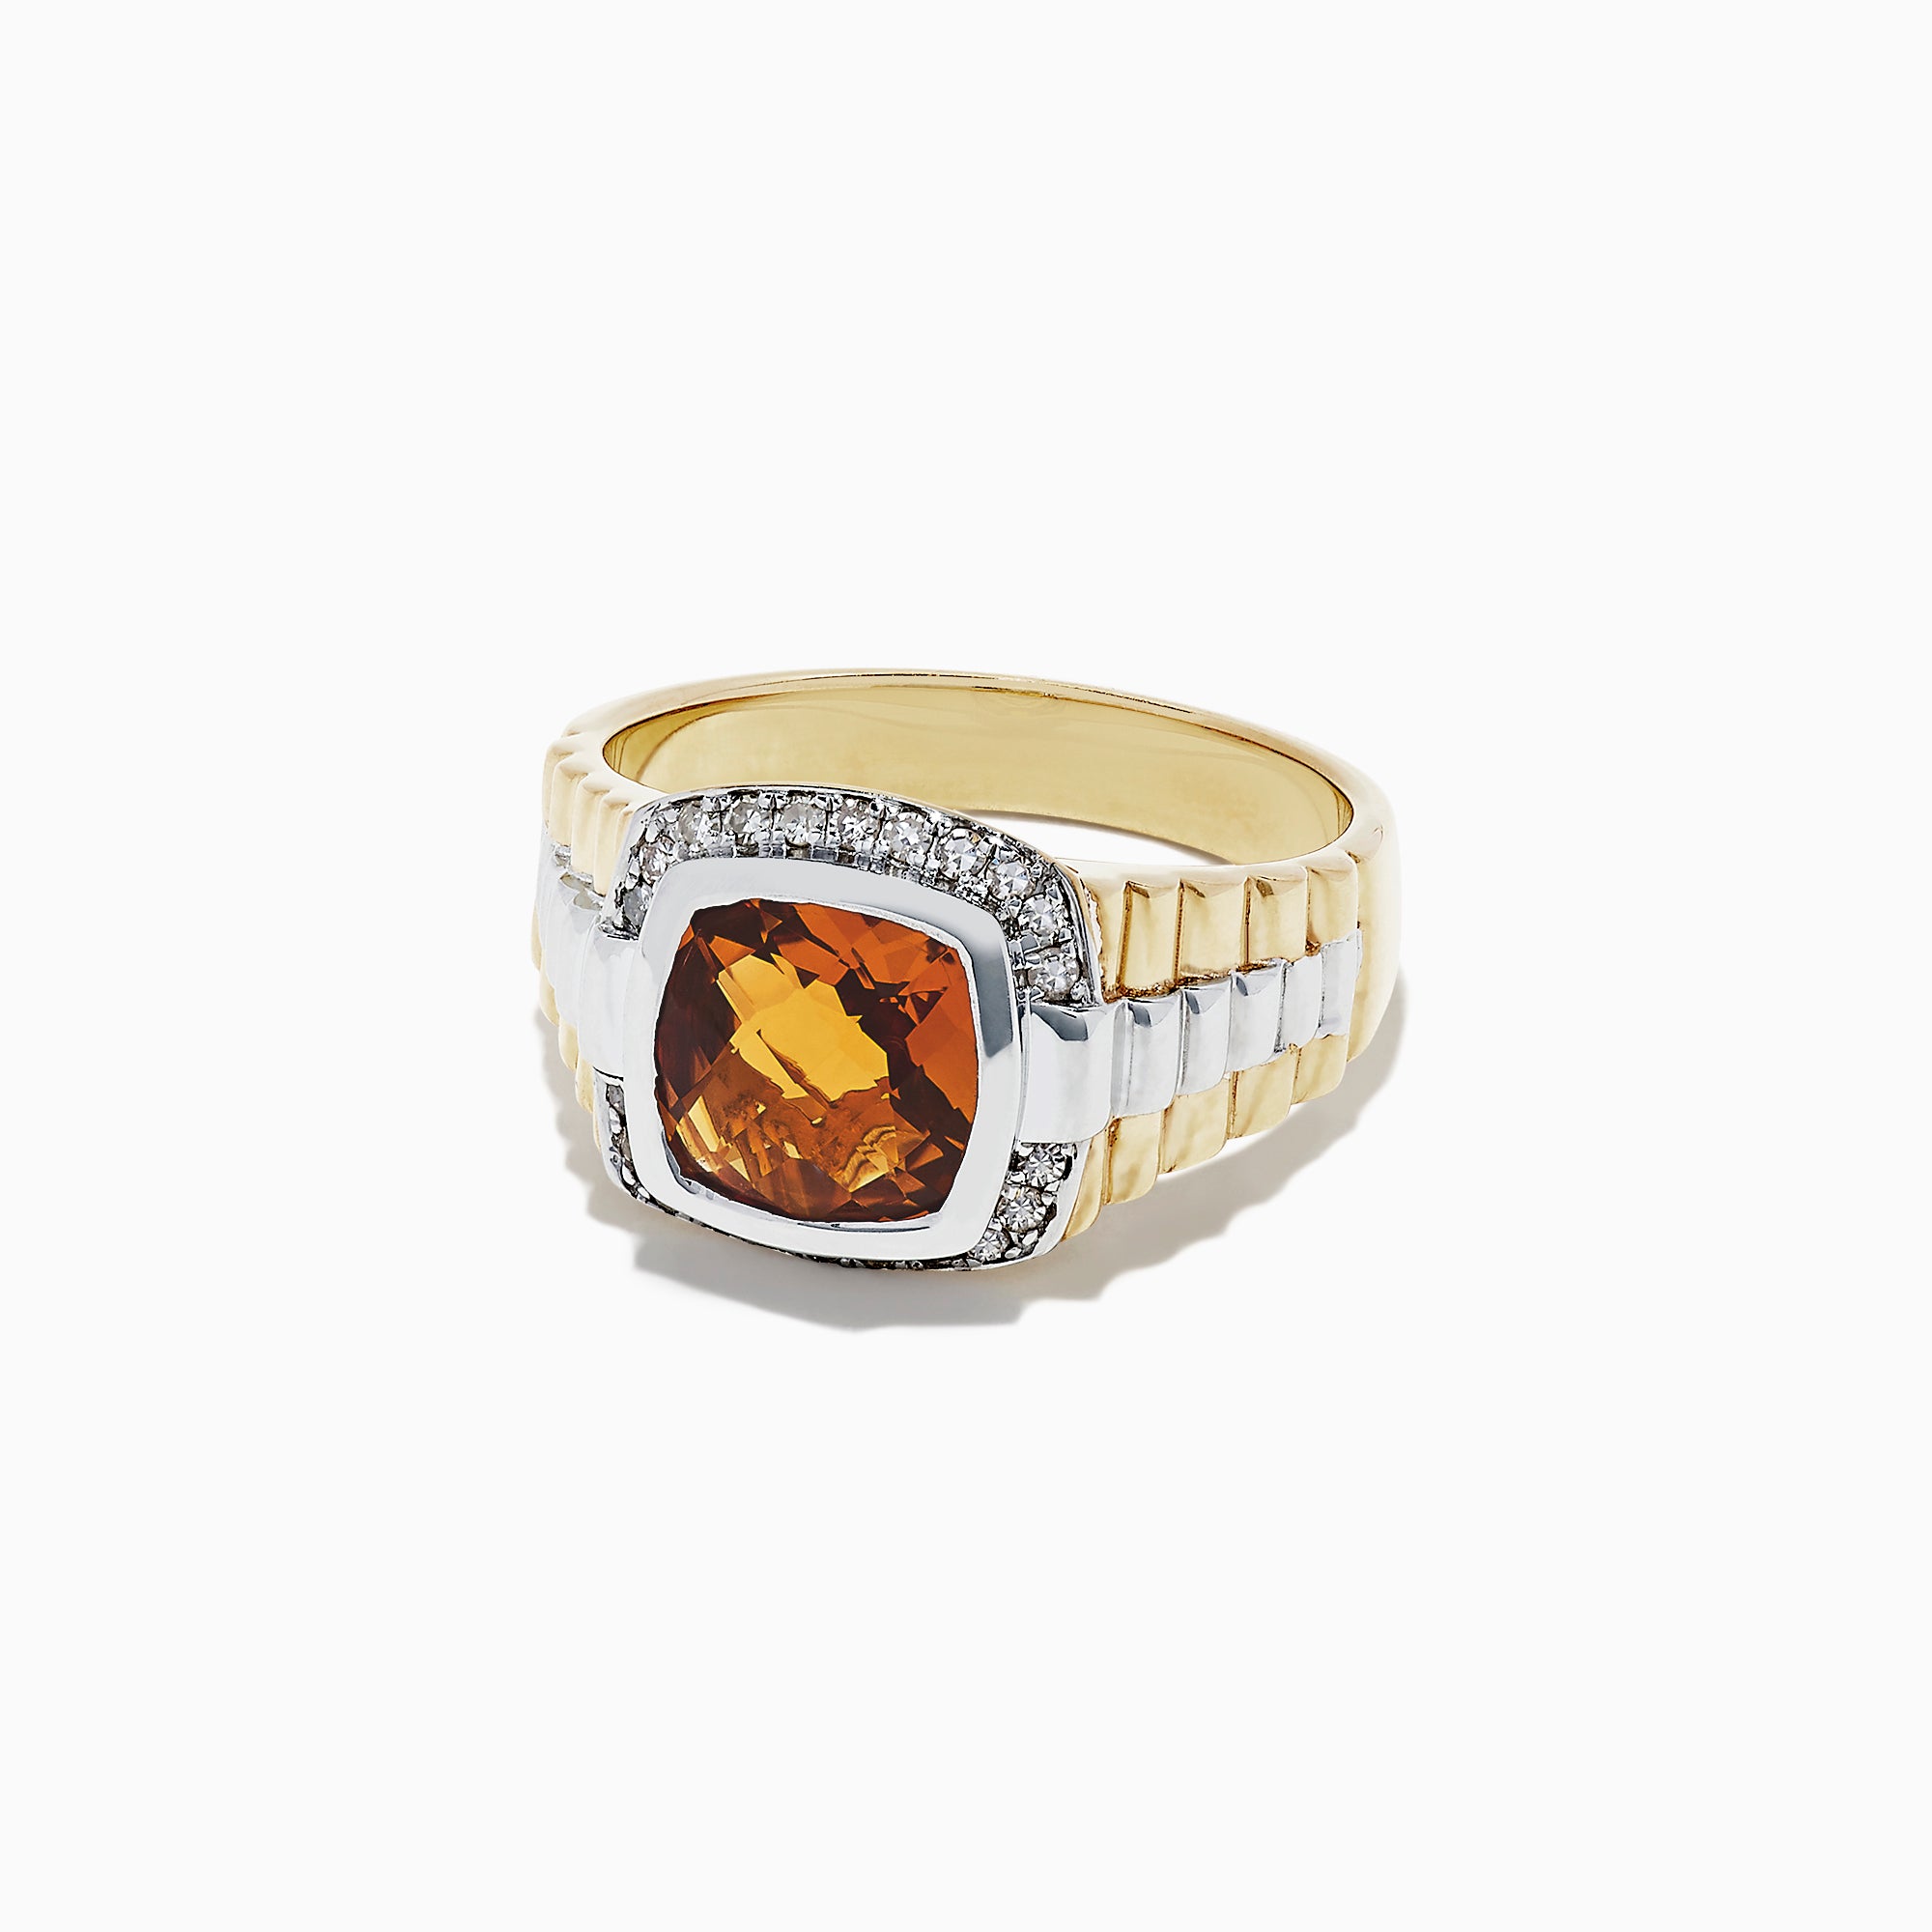 Effy Men's Sterling Silver Citrine and Diamond Ring, 2.87 TCW